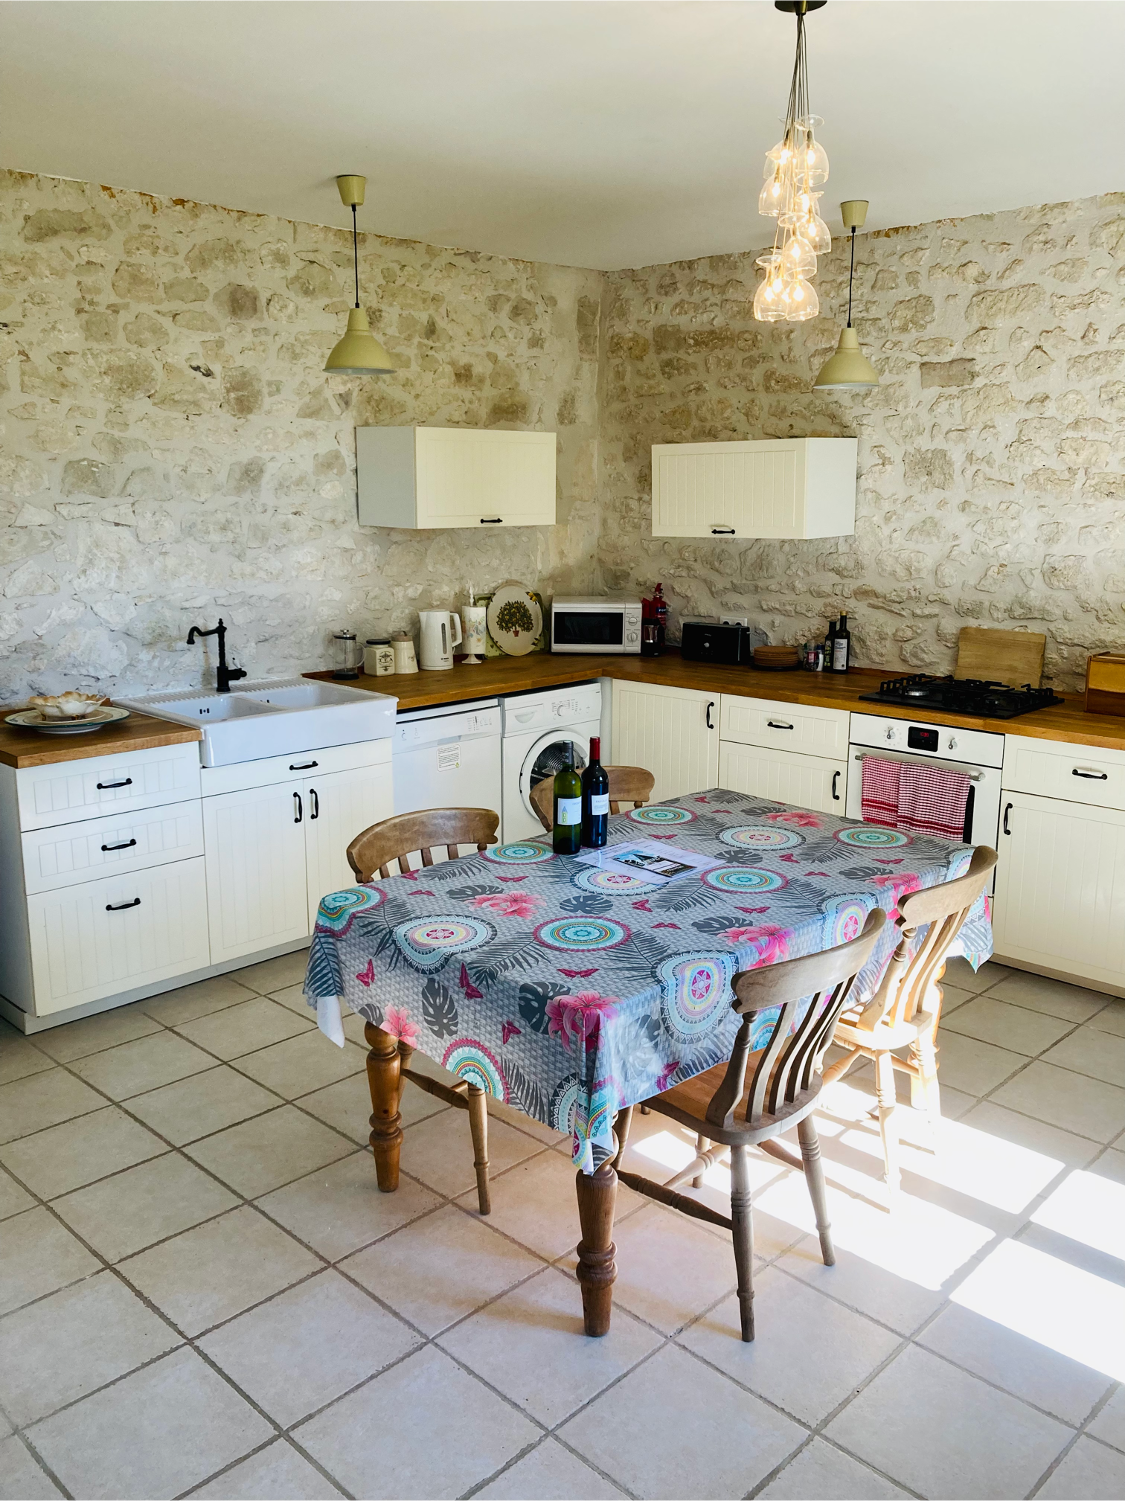 A relaxing haven amidst the Dordogne vines!